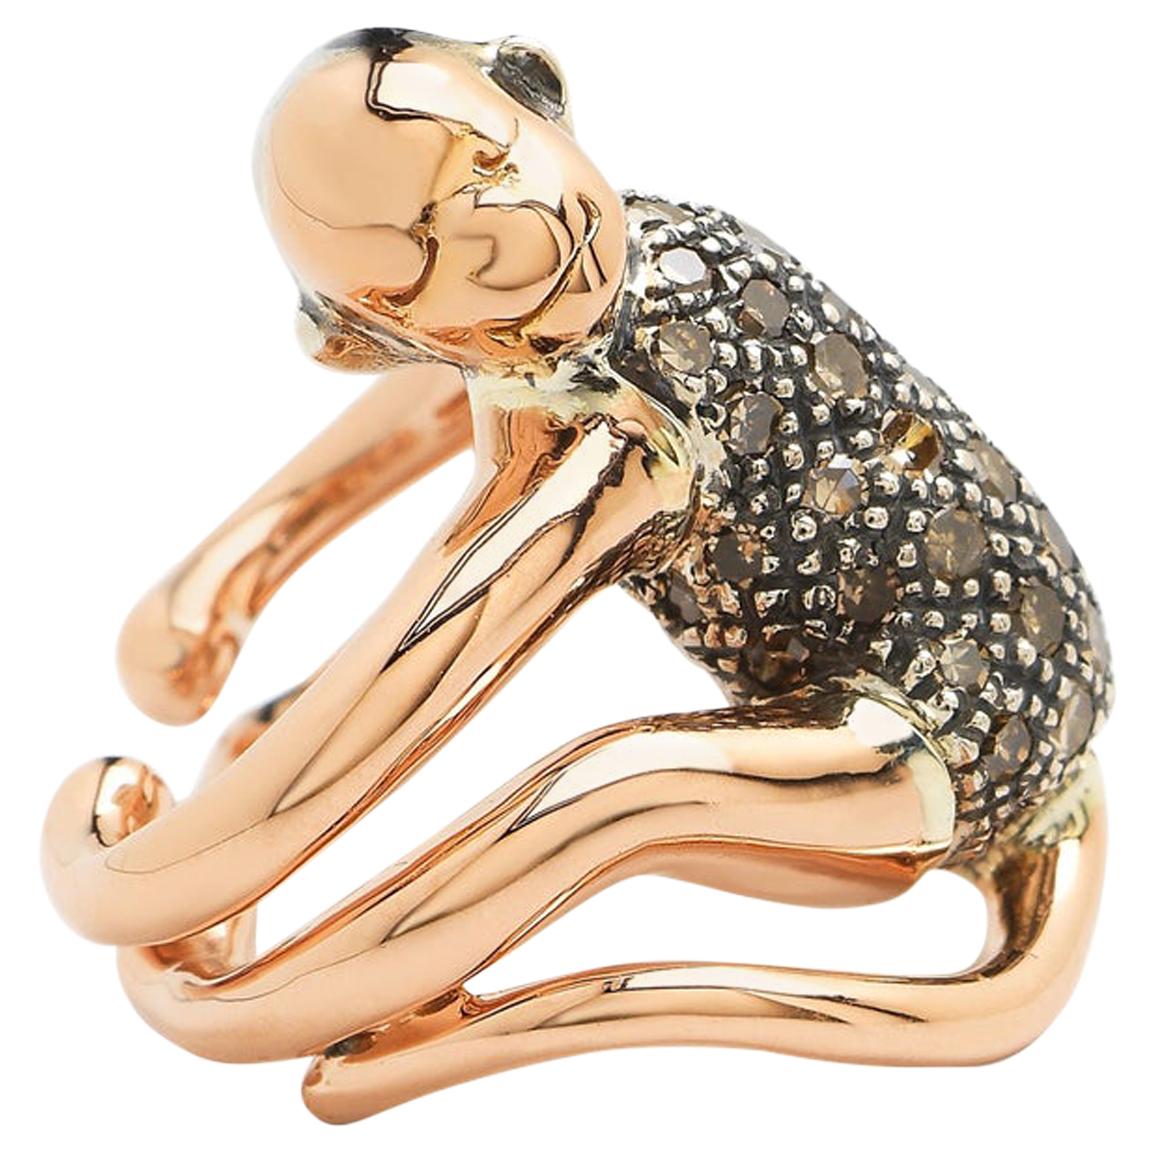 Monkey Ear Hugger 18 Karat Gold and Sterling Silver and Diamond Earring For Sale